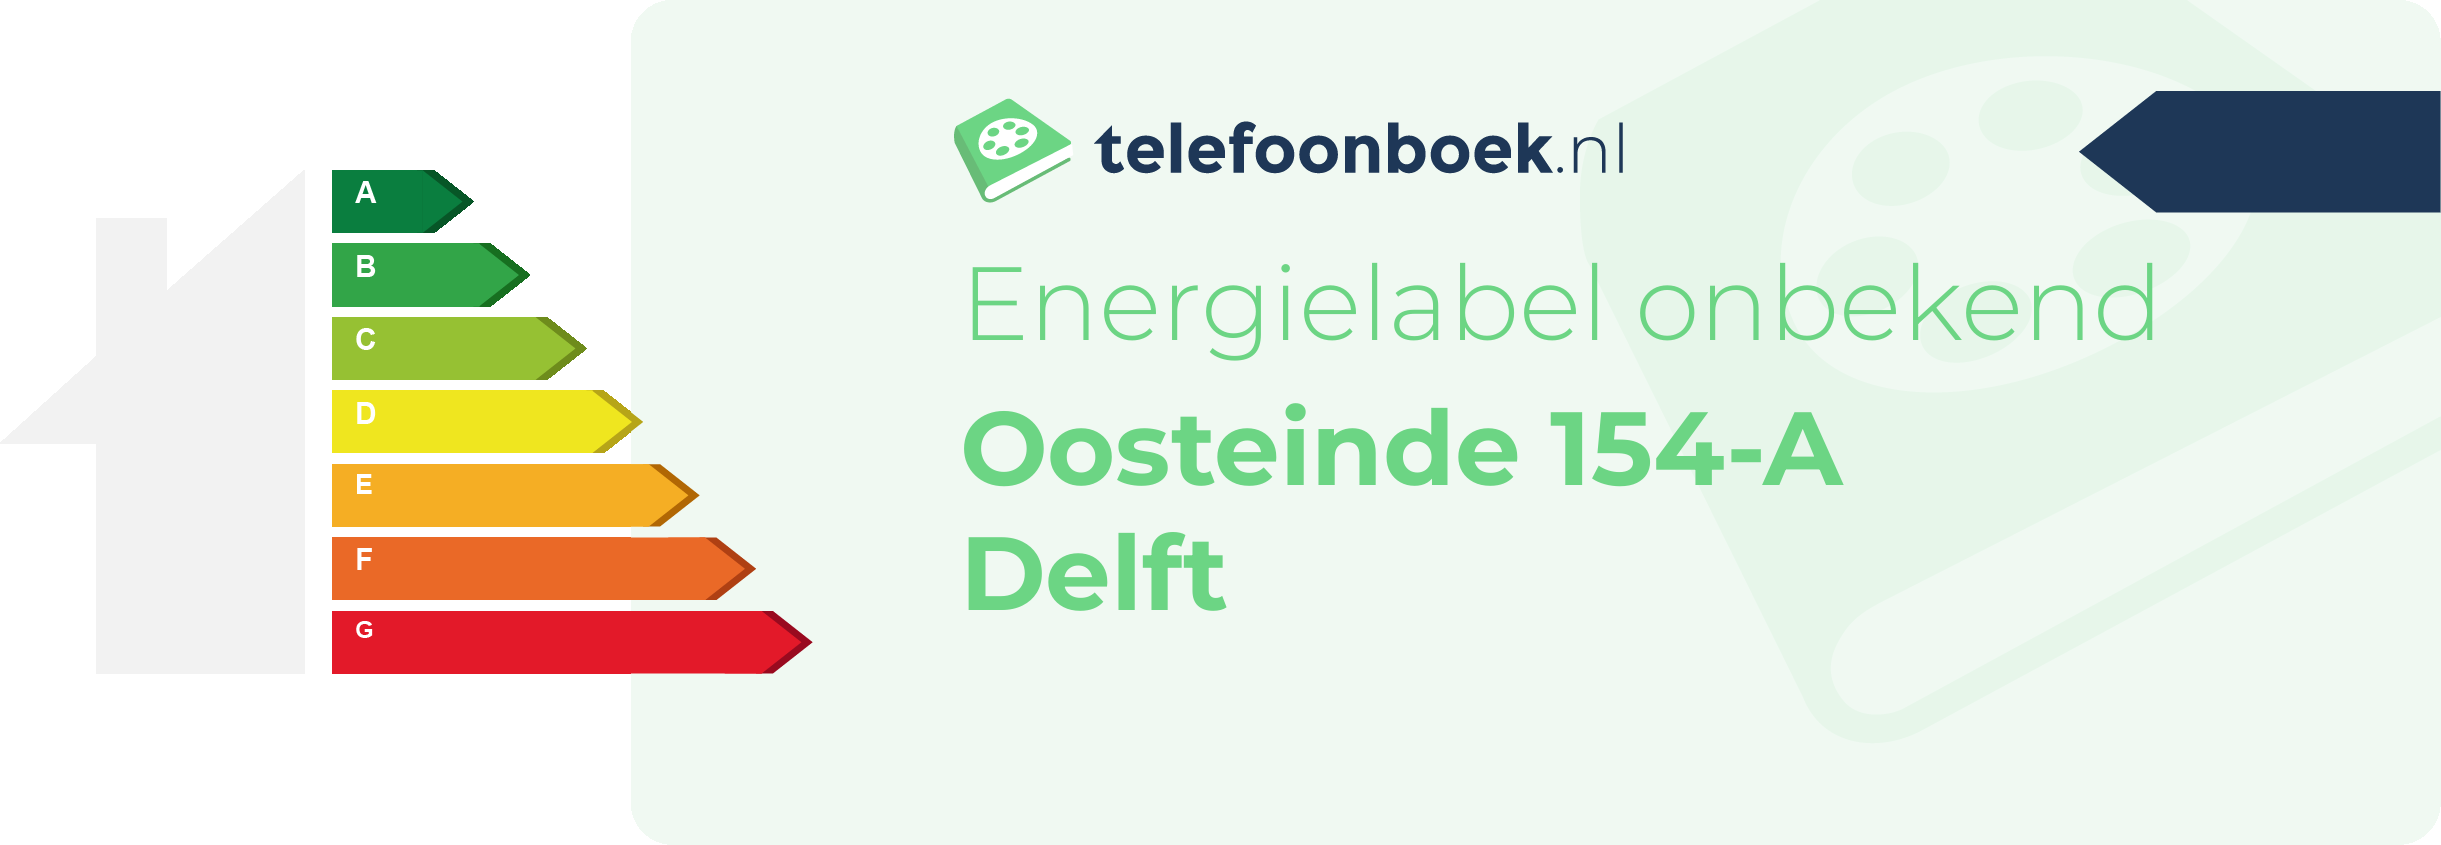 Energielabel Oosteinde 154-A Delft